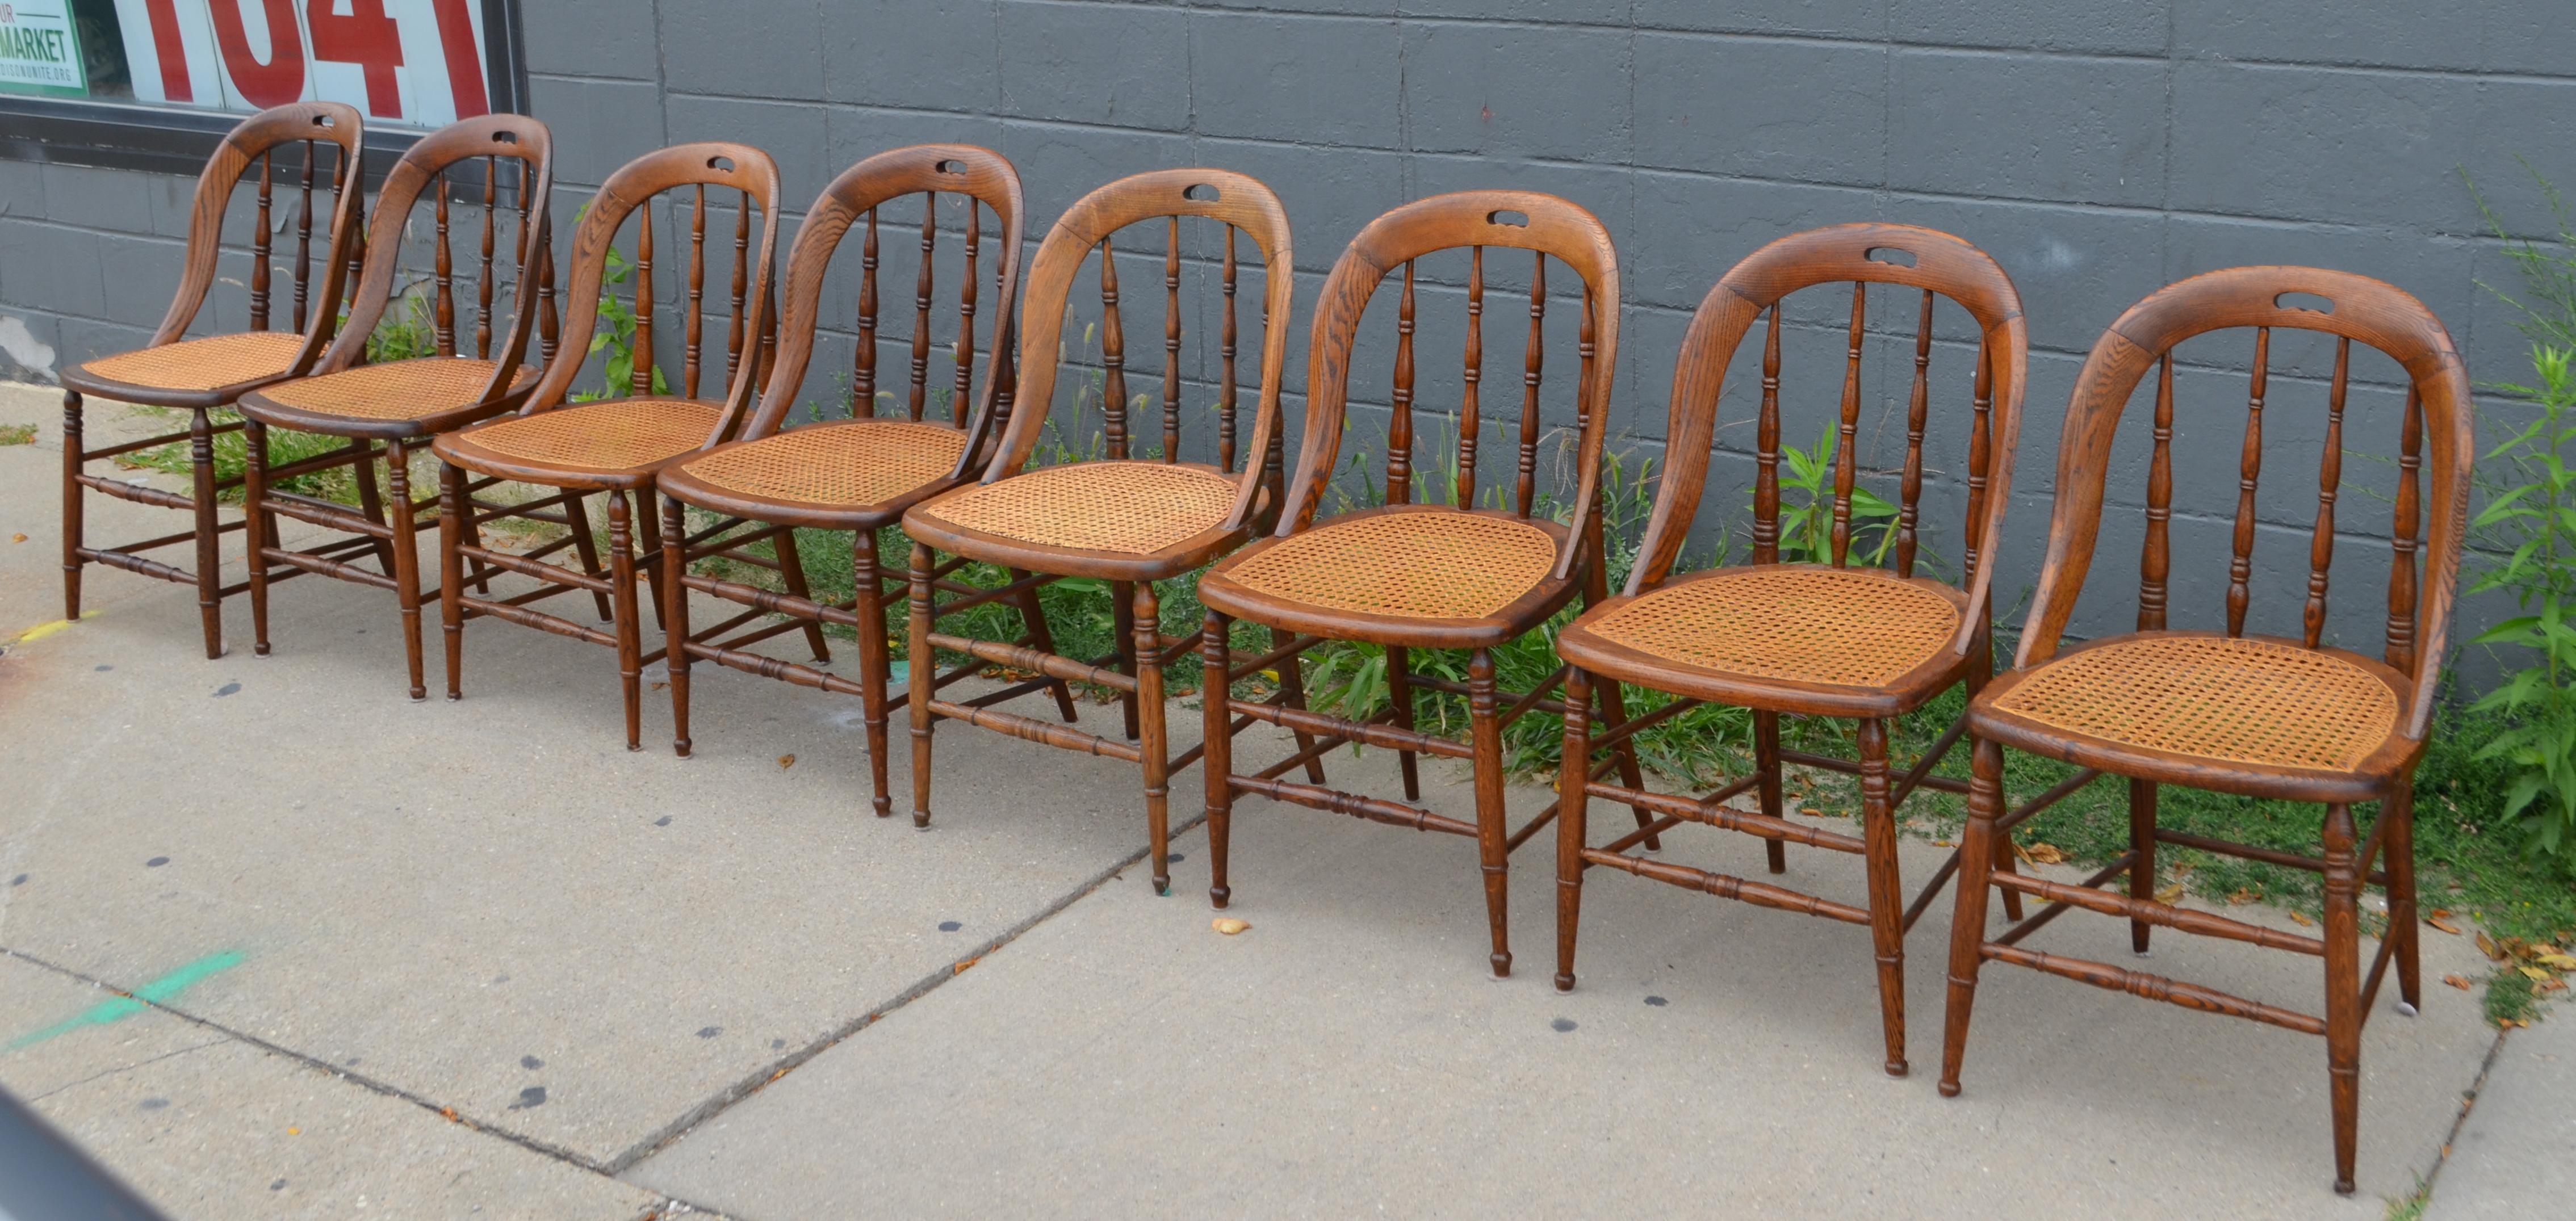 Dining room chairs, set of 8, with caned seats. Antique Windsor bow-back style in soft pine finish with cut-out handles. Lathe-turned legs and back spokes. Rare to find a large set of 8 in such excellent antique condition. Very comfortable and